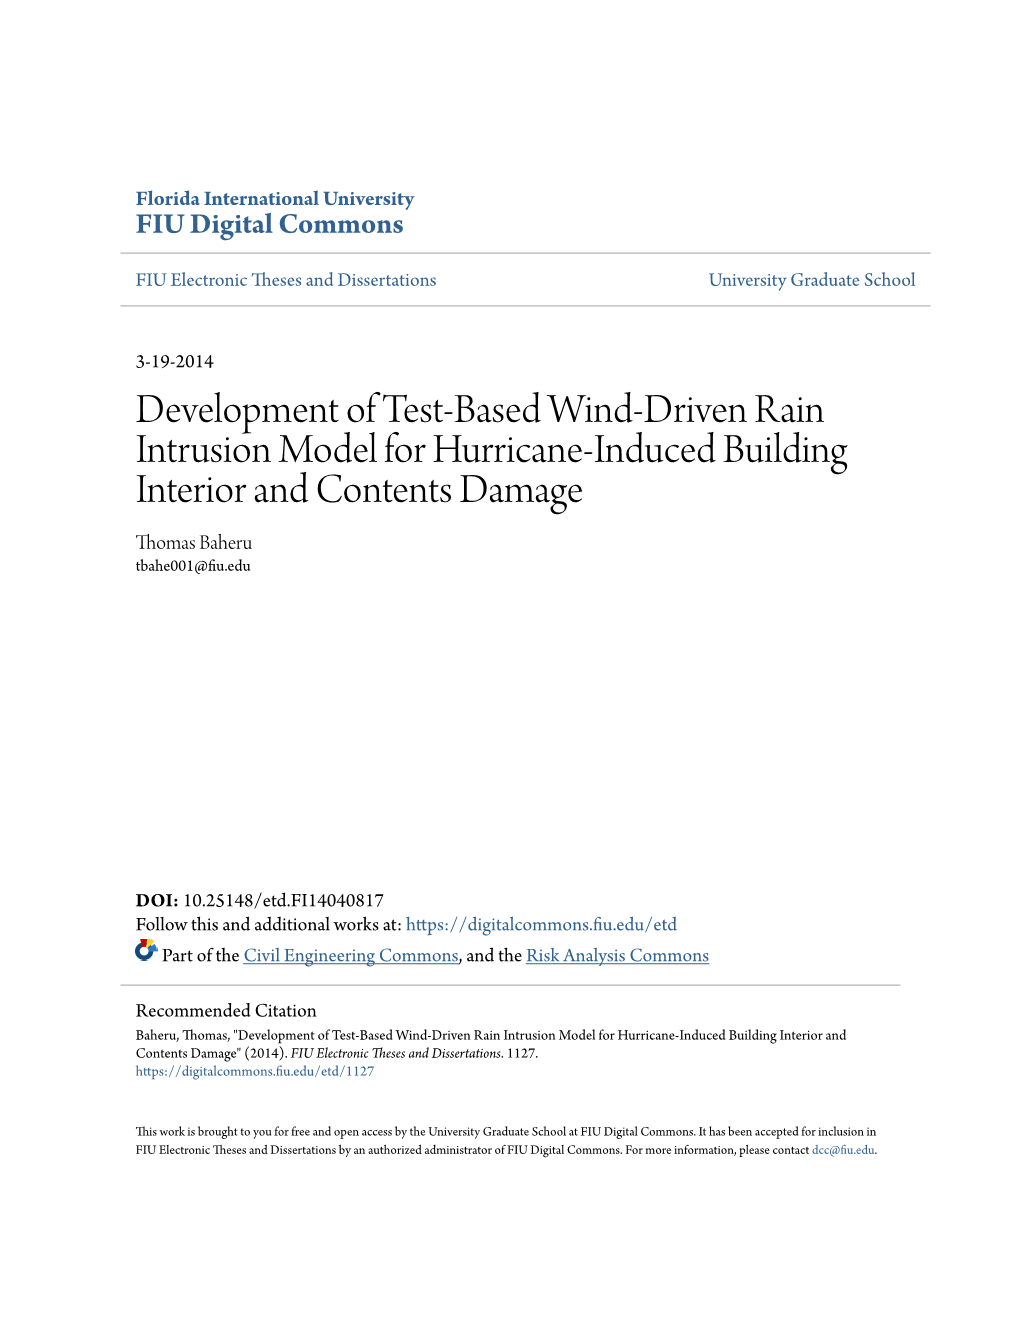 Development of Test-Based Wind-Driven Rain Intrusion Model for Hurricane-Induced Building Interior and Contents Damage Thomas Baheru Tbahe001@Fiu.Edu